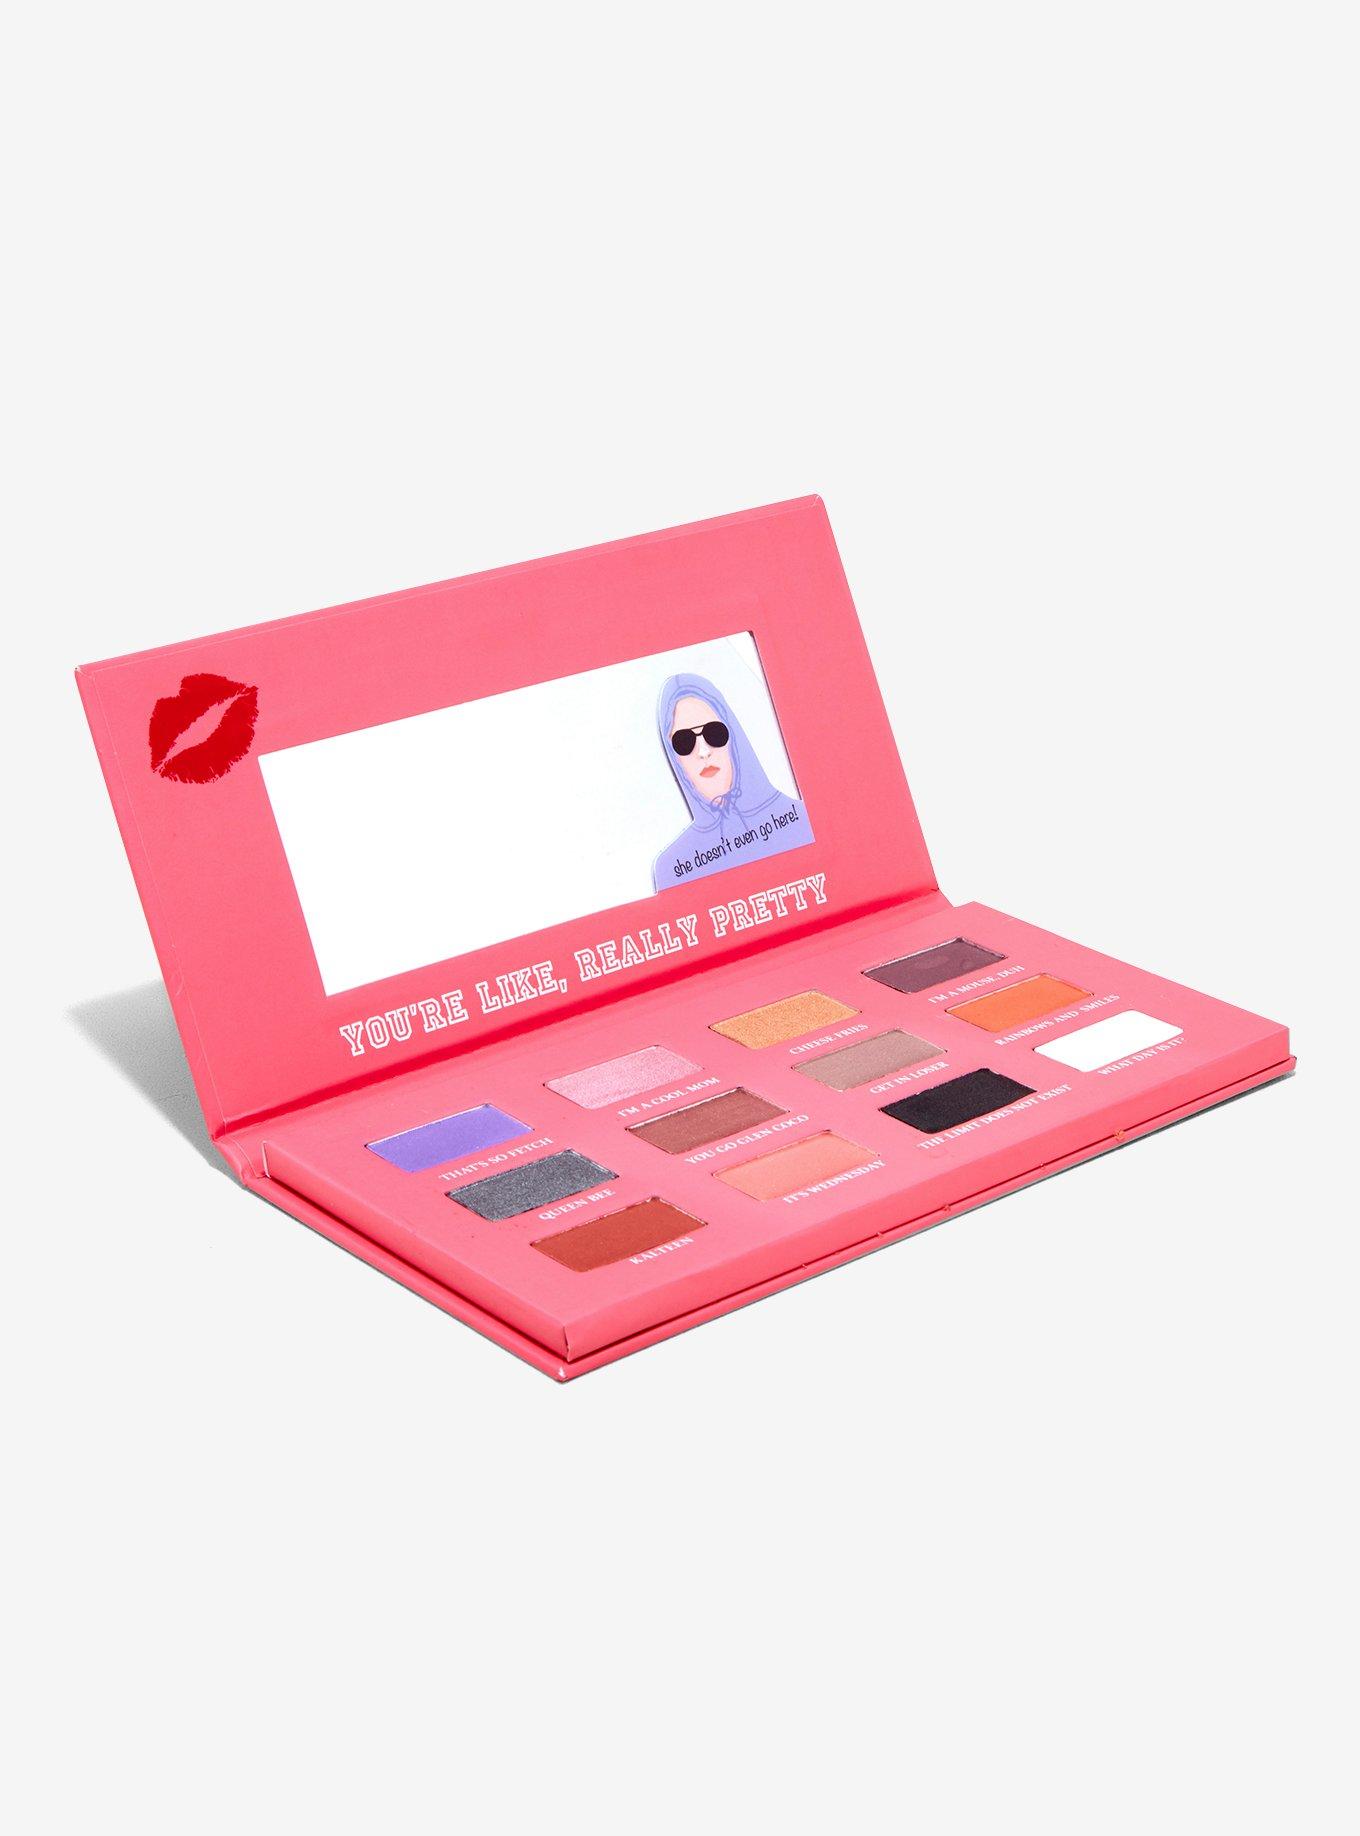 Hot Topic Is Selling a “Mean Girls” Eyeshadow Palette